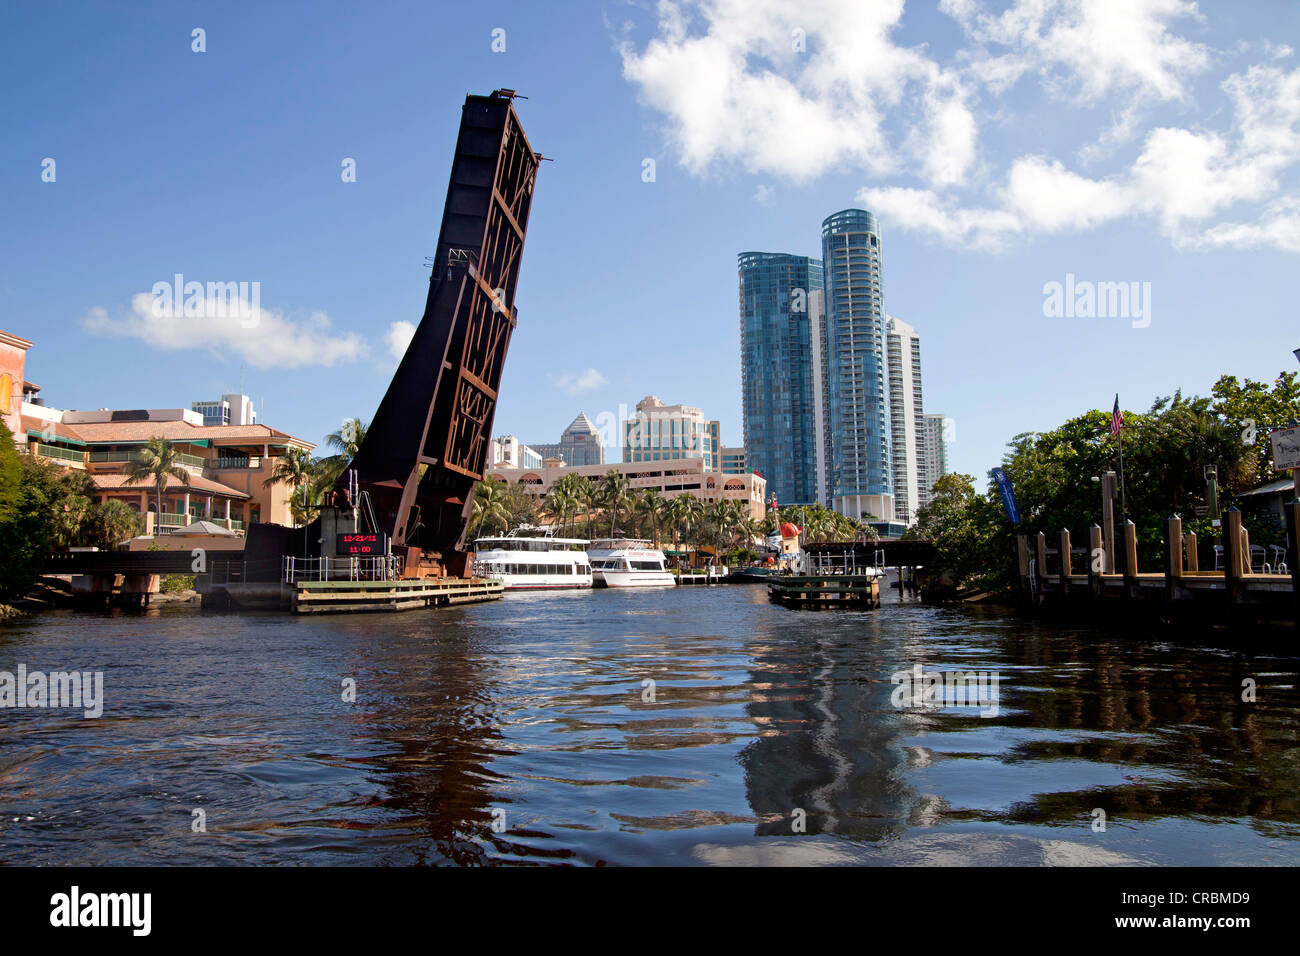 New River with bascule bridge and skyline of Fort Lauderdale, Florida, USA Stock Photo